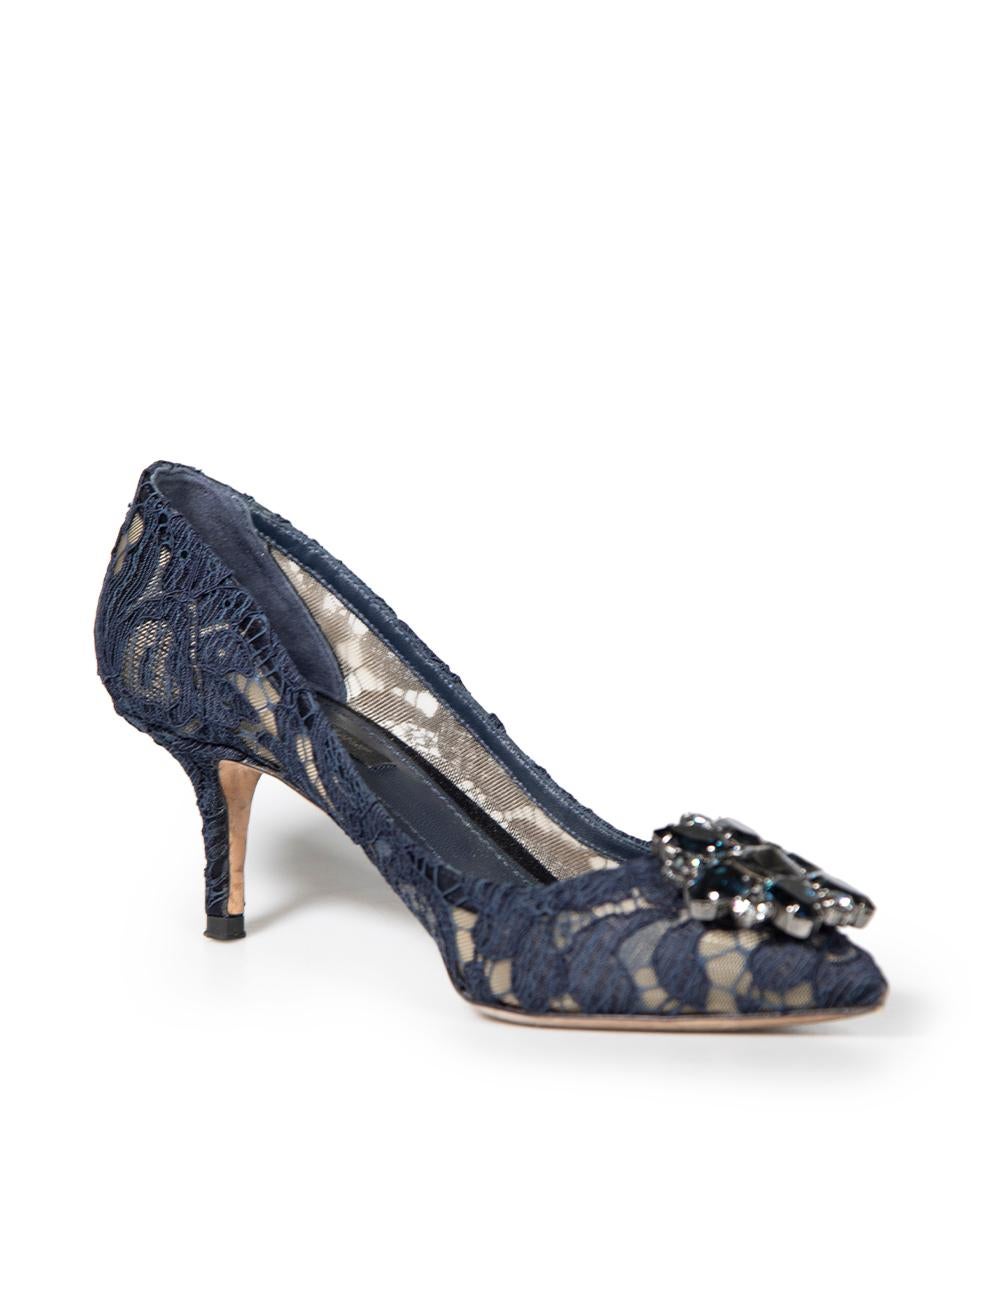 CONDITION is Very good. Minimal wear to shoes is evident. Minimal wear to both heel tips with abrasions on this used Dolce & Gabbana designer resale item. These shoes come with original dust bag.
 
 
 
 Details
 
 
 Bellucci
 
 Navy
 
 Lace
 
 Slip